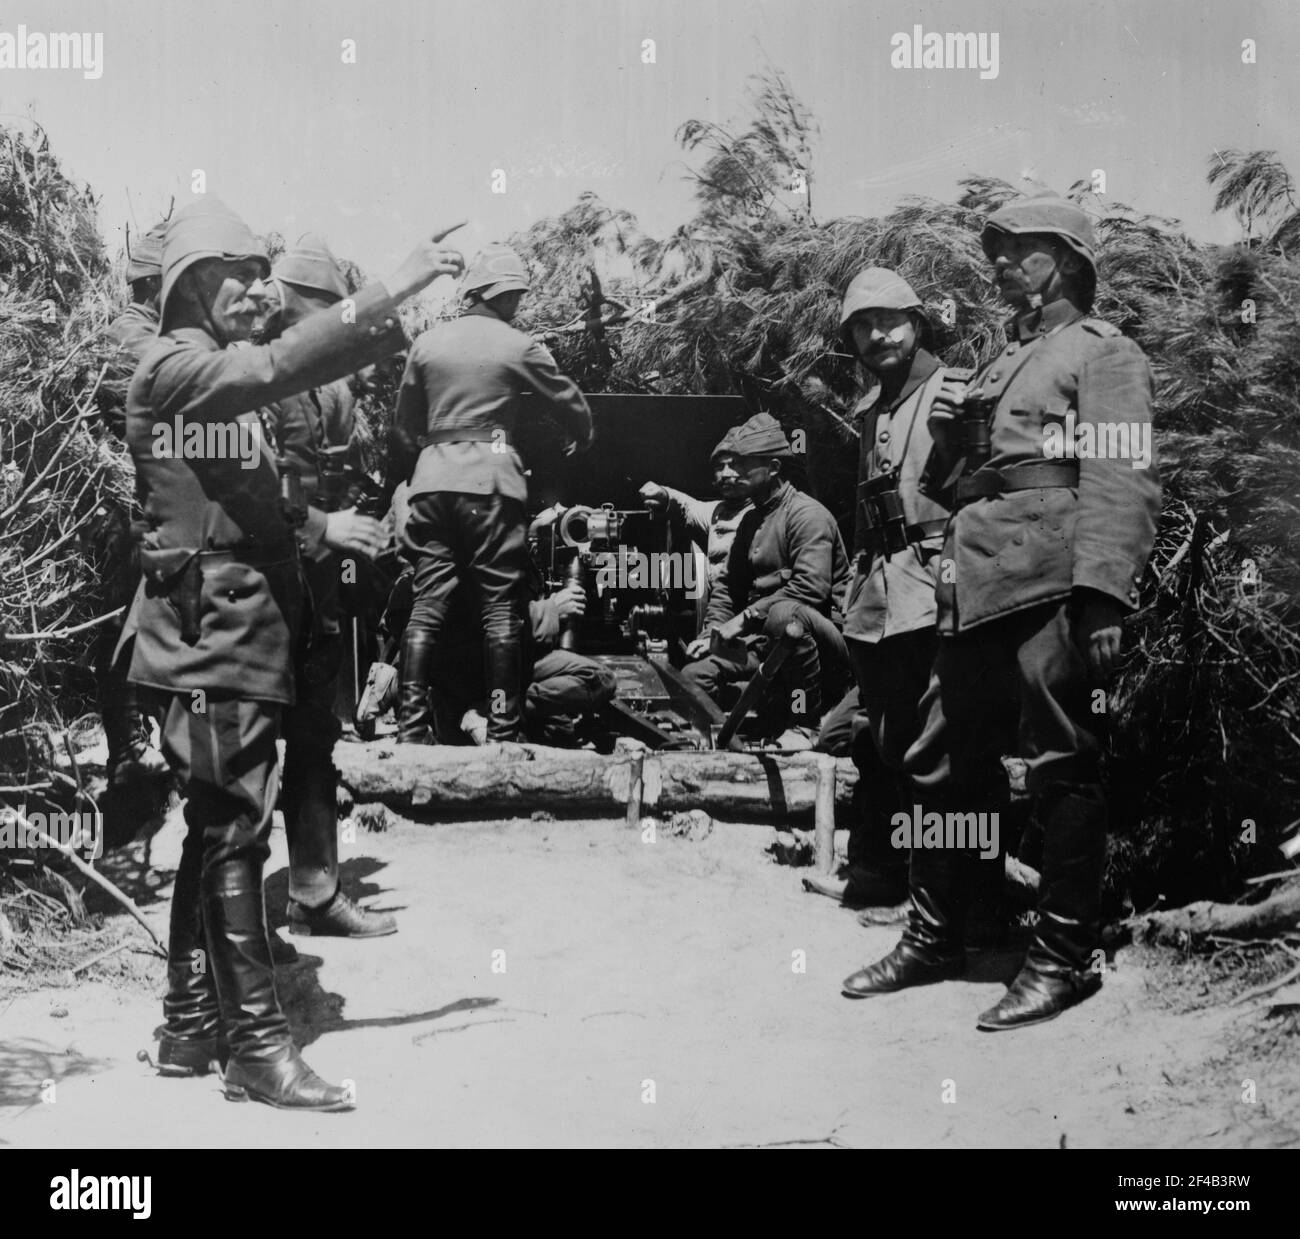 Photograph shows Ottoman soldiers and guns during the Gallipoli campaign which took place on the Gallipoli Peninsula in the Ottoman Empire (now Gelibolu, Turkey) between April 1915 and January 1916 during World War I. Stock Photo